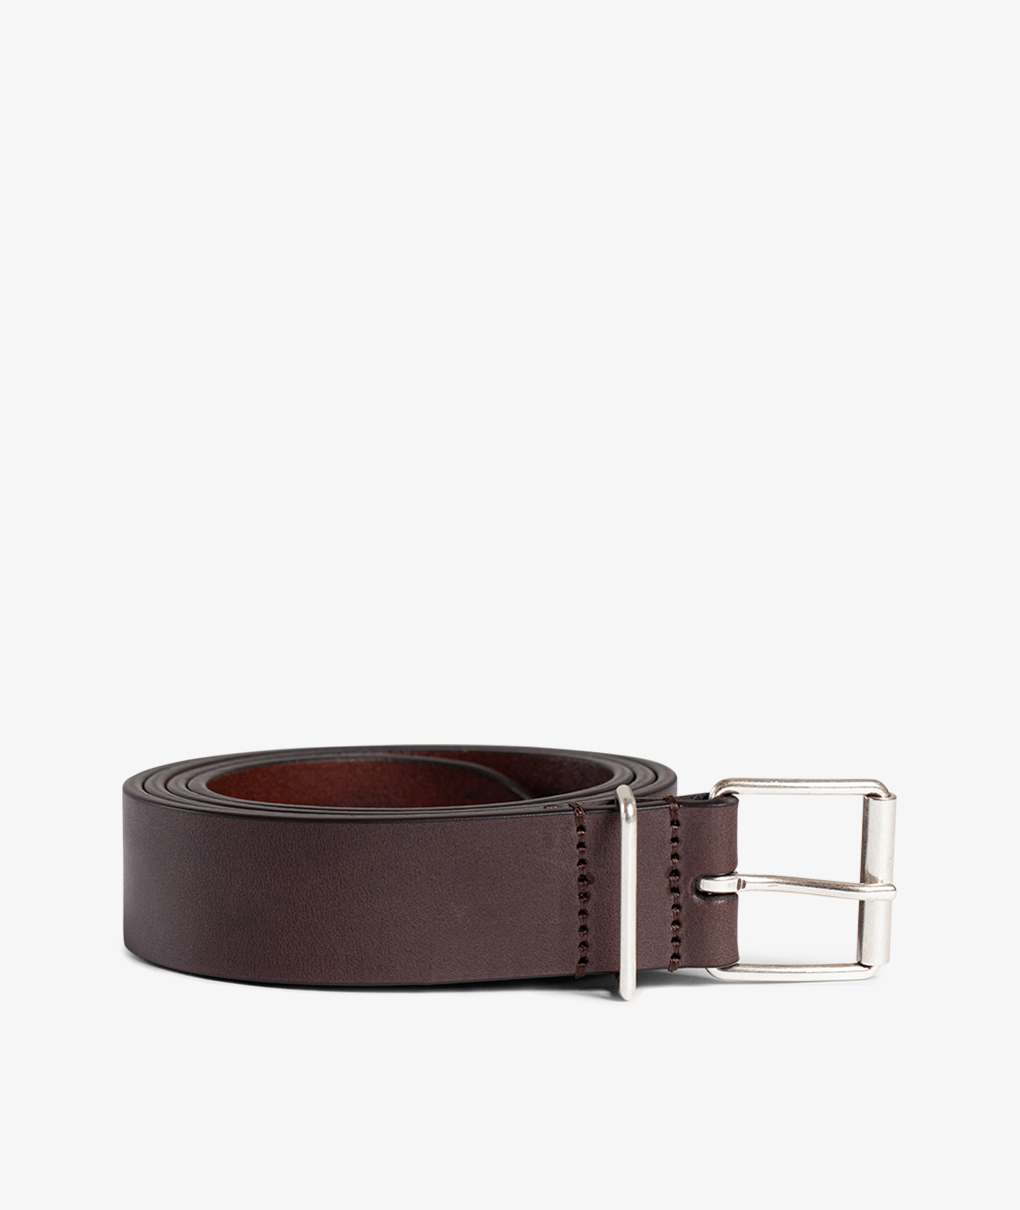 Norse Store  Shipping Worldwide - Anderson's Leather Belt - Dark Brown